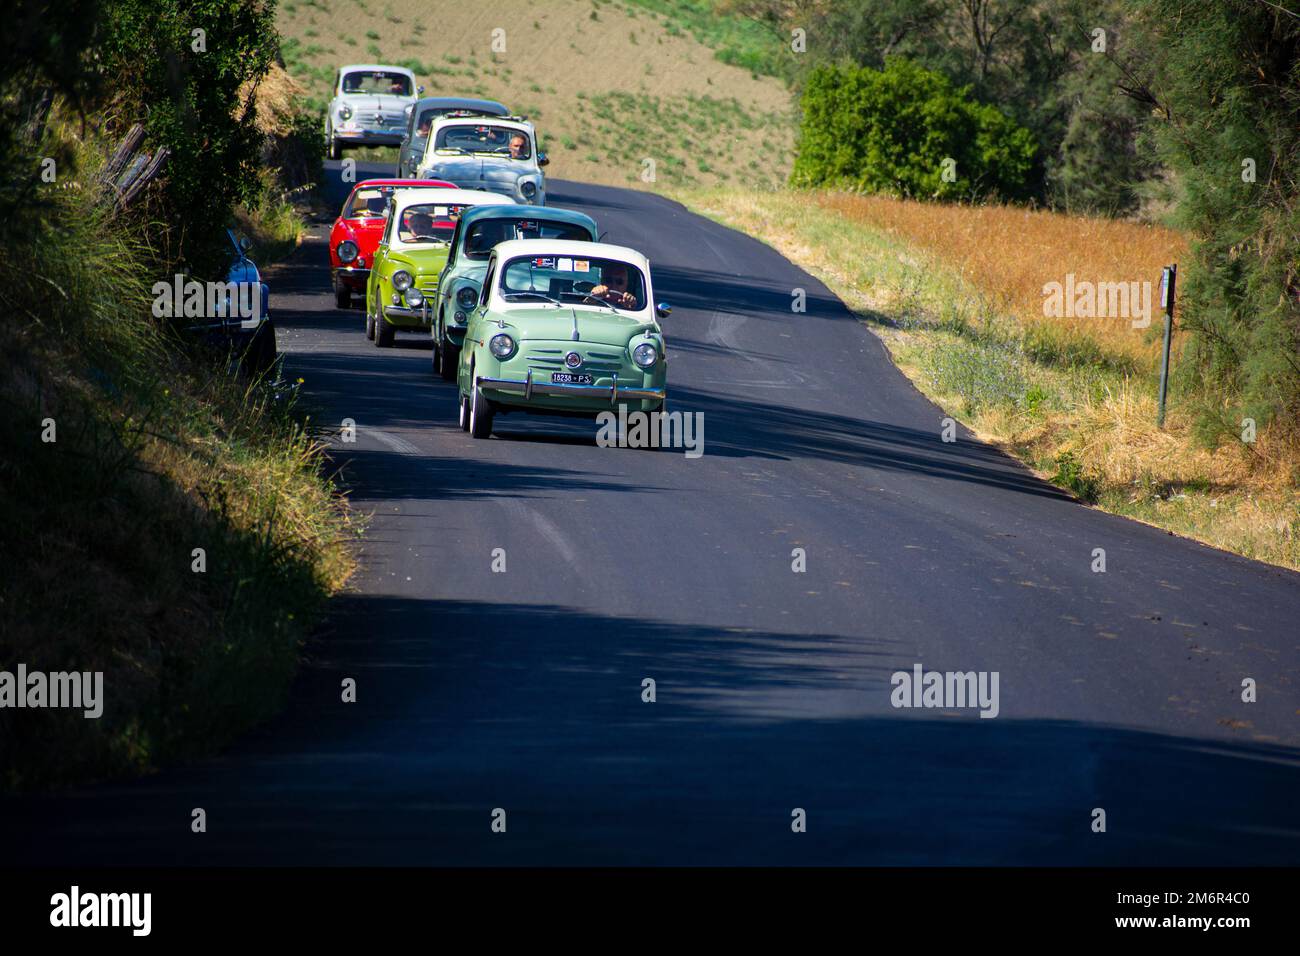 Rally of classic cars fiat 600 in pesaro Stock Photo